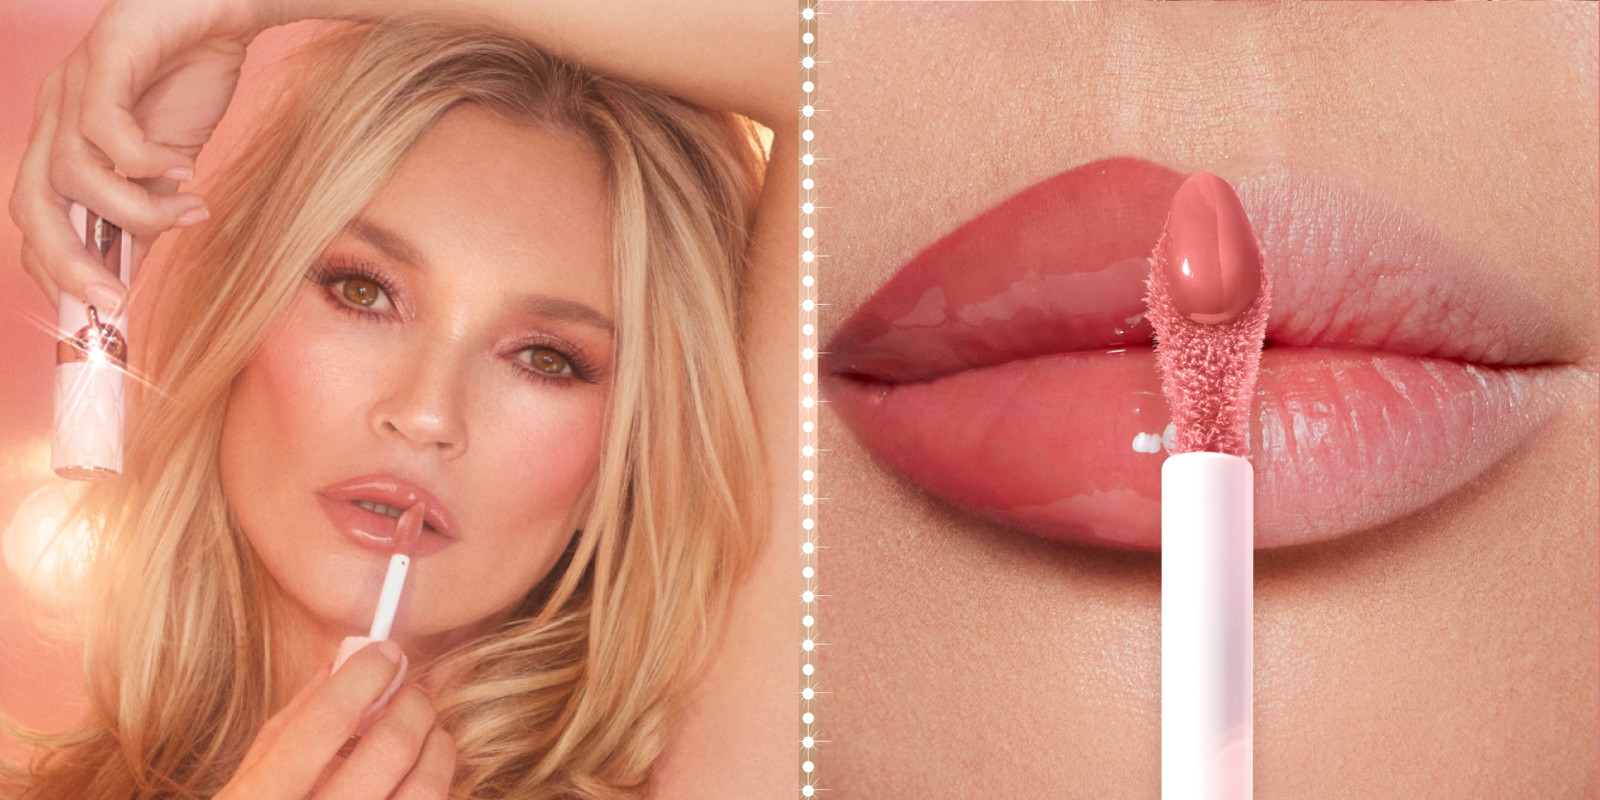 Split image with Kate Moss applying Pillow Talk Big Lip Plumpgasm plumping lip gloss to her lips, and a close up of lips with half wearing plumping lip gloss and appearing fuller than the other half with no product on.